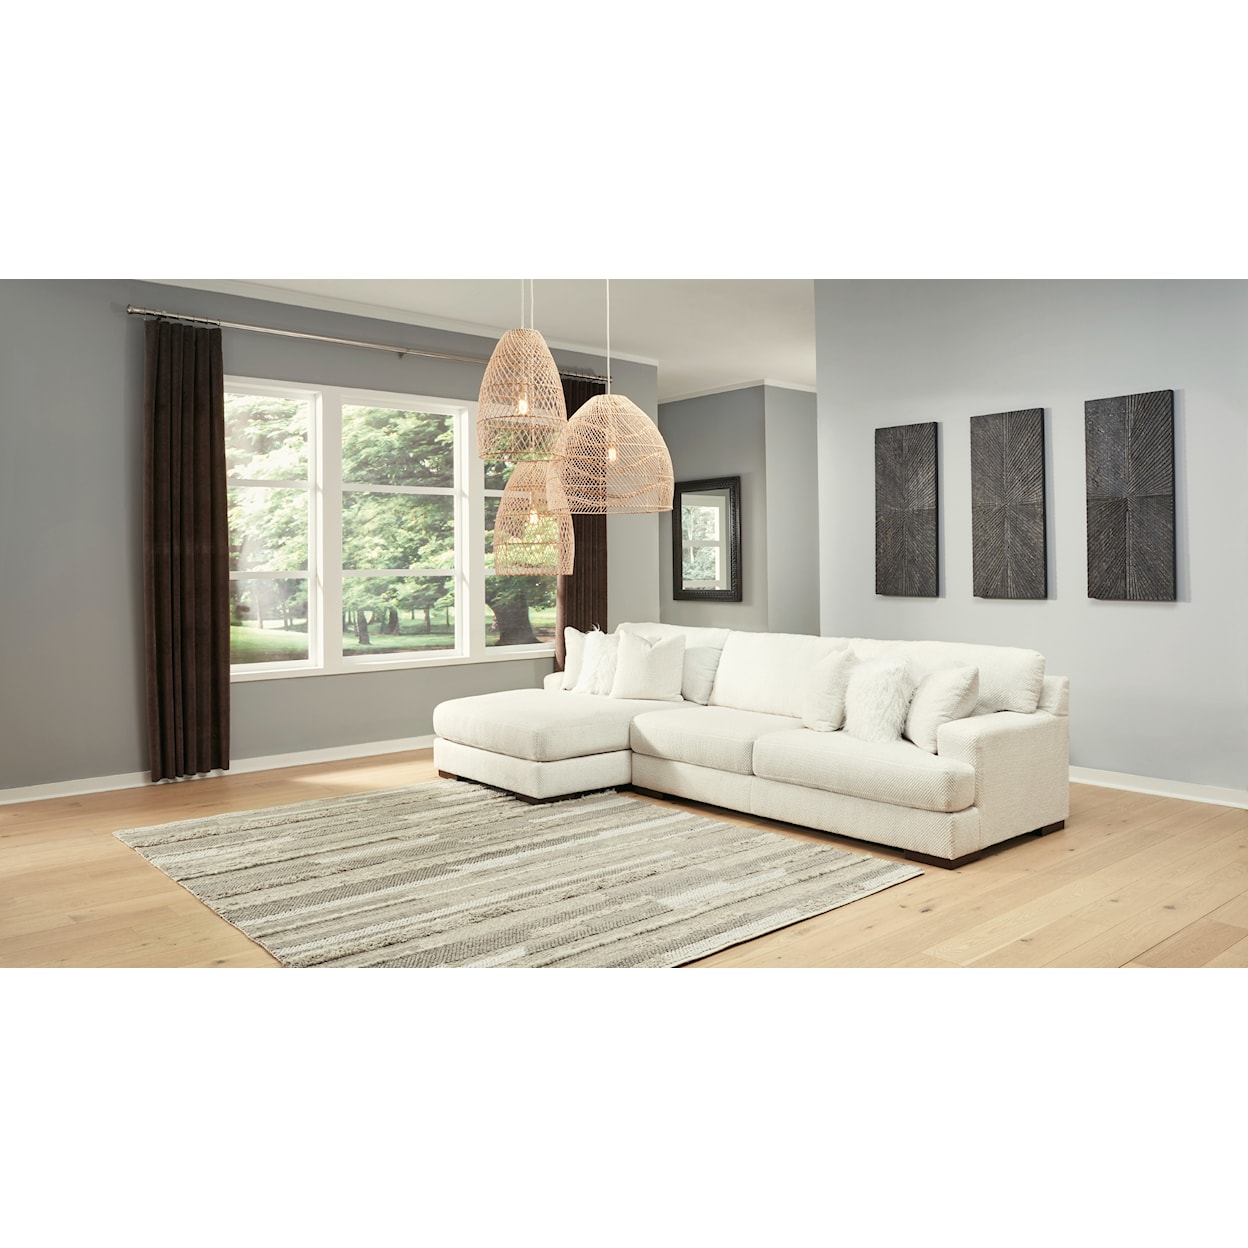 Ashley Furniture Signature Design Zada 2-Piece Sectional with Chaise